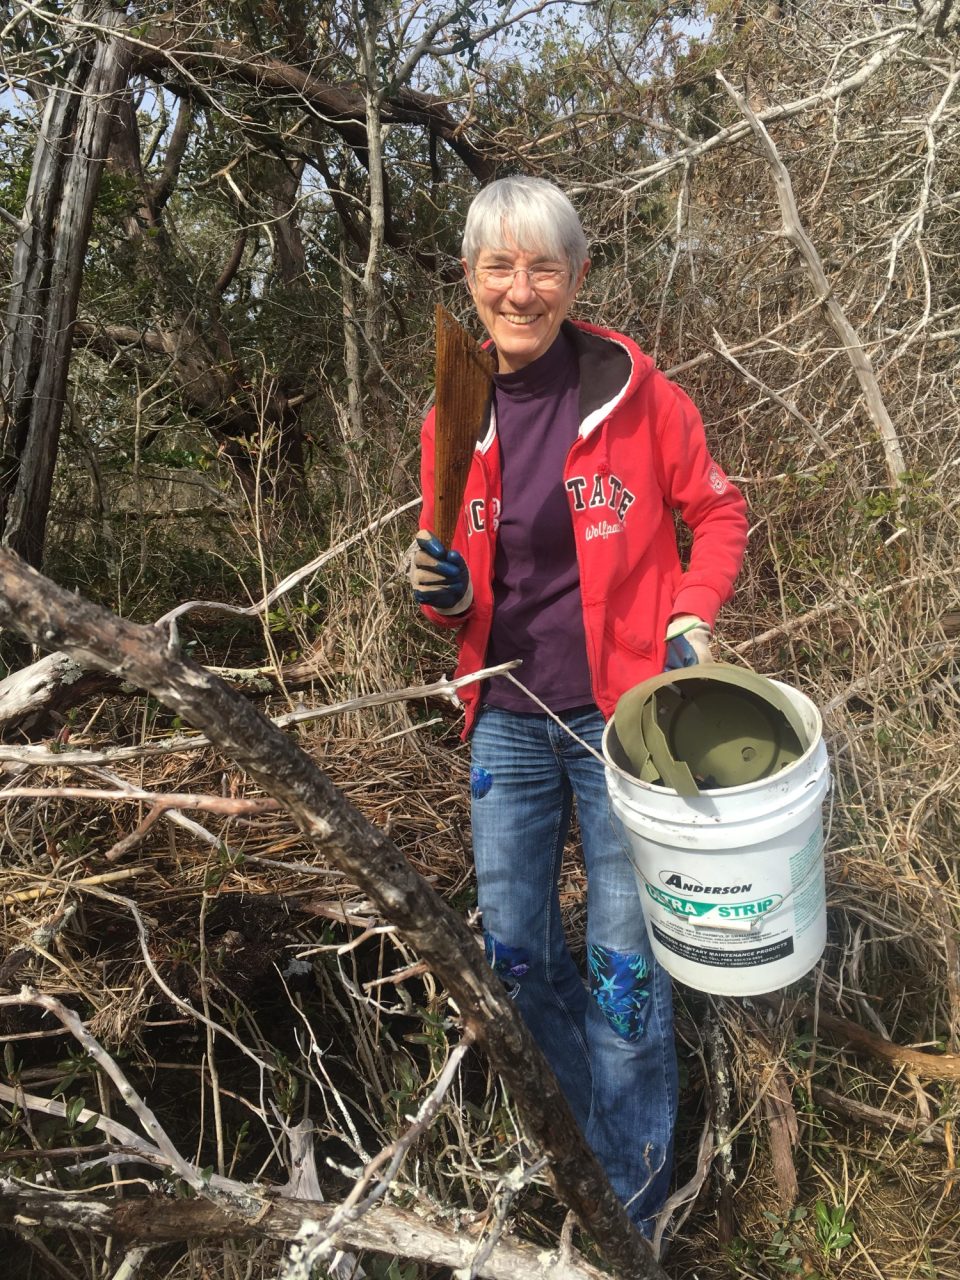 A volunteer at Hoop Pool Creek gathering plastic and wooden debris from the trail.